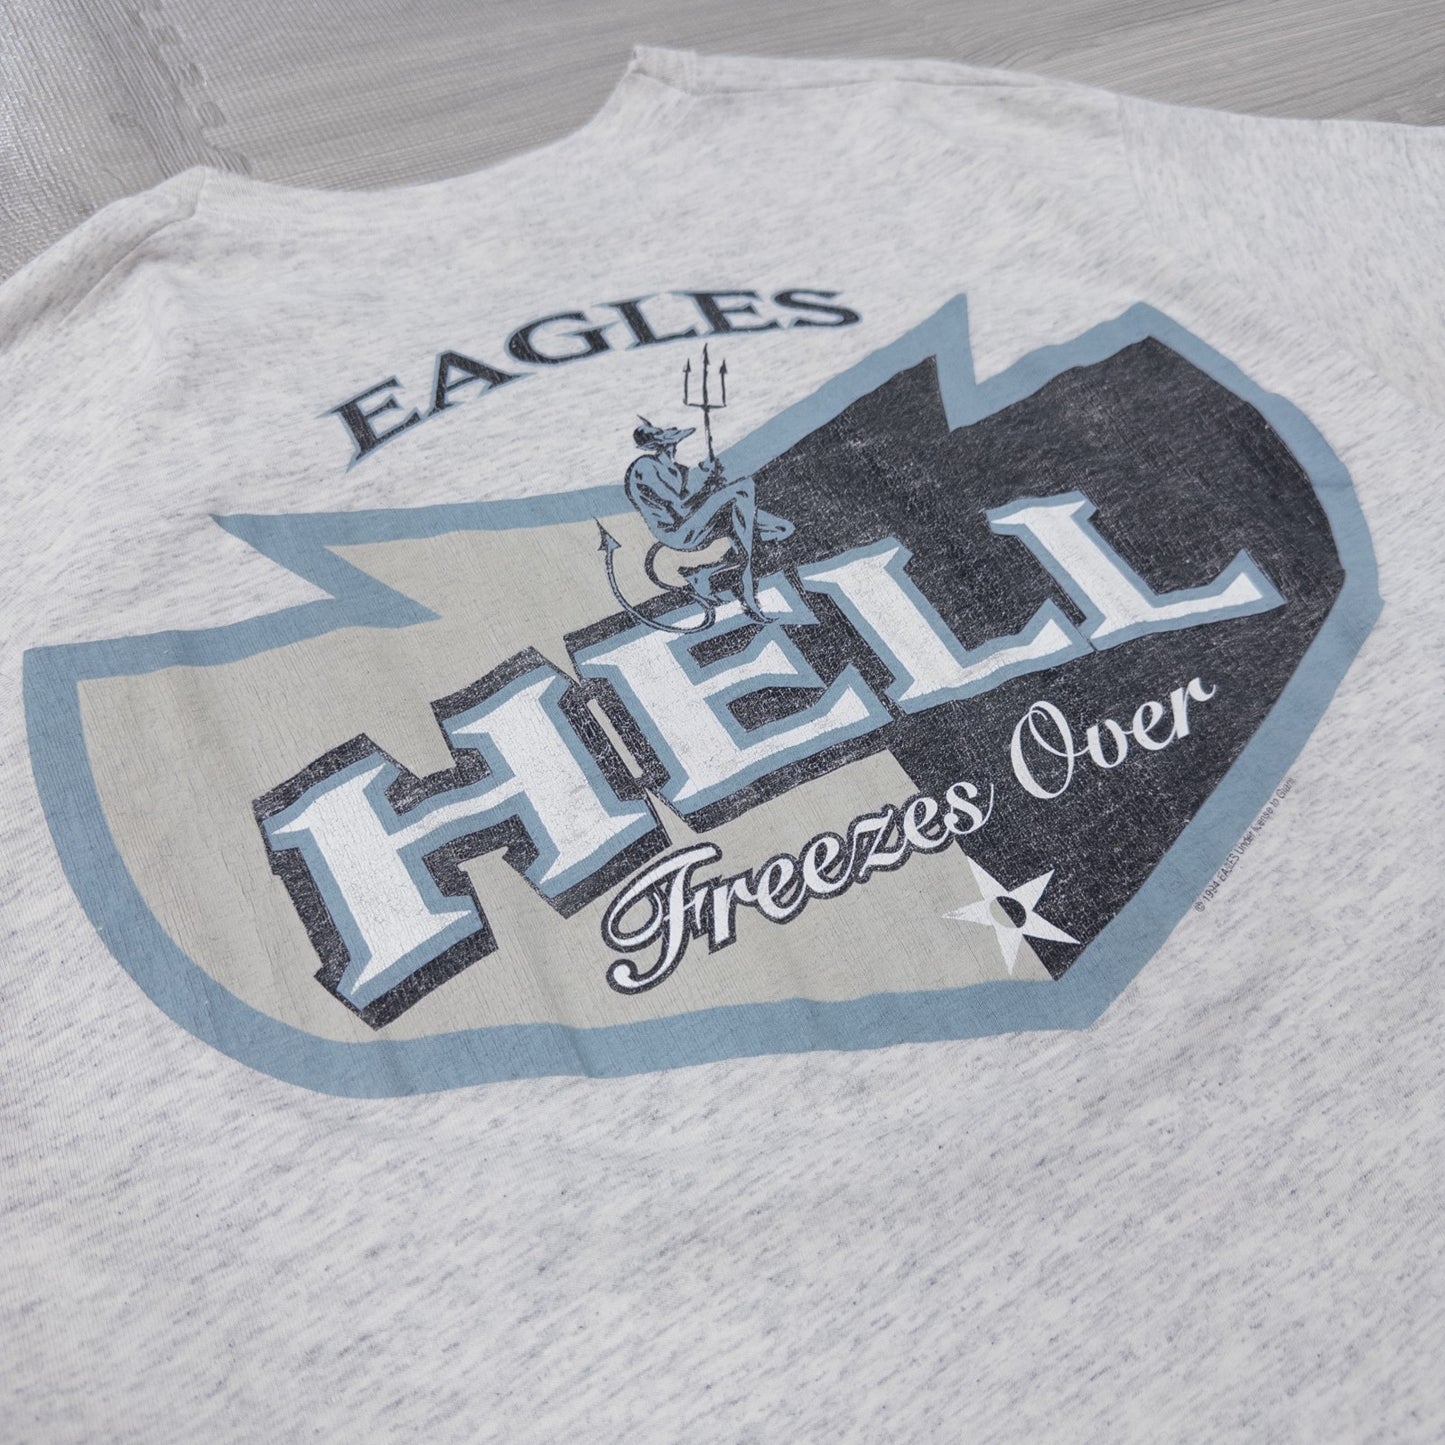 90s Eagles Hell Freezes Over L